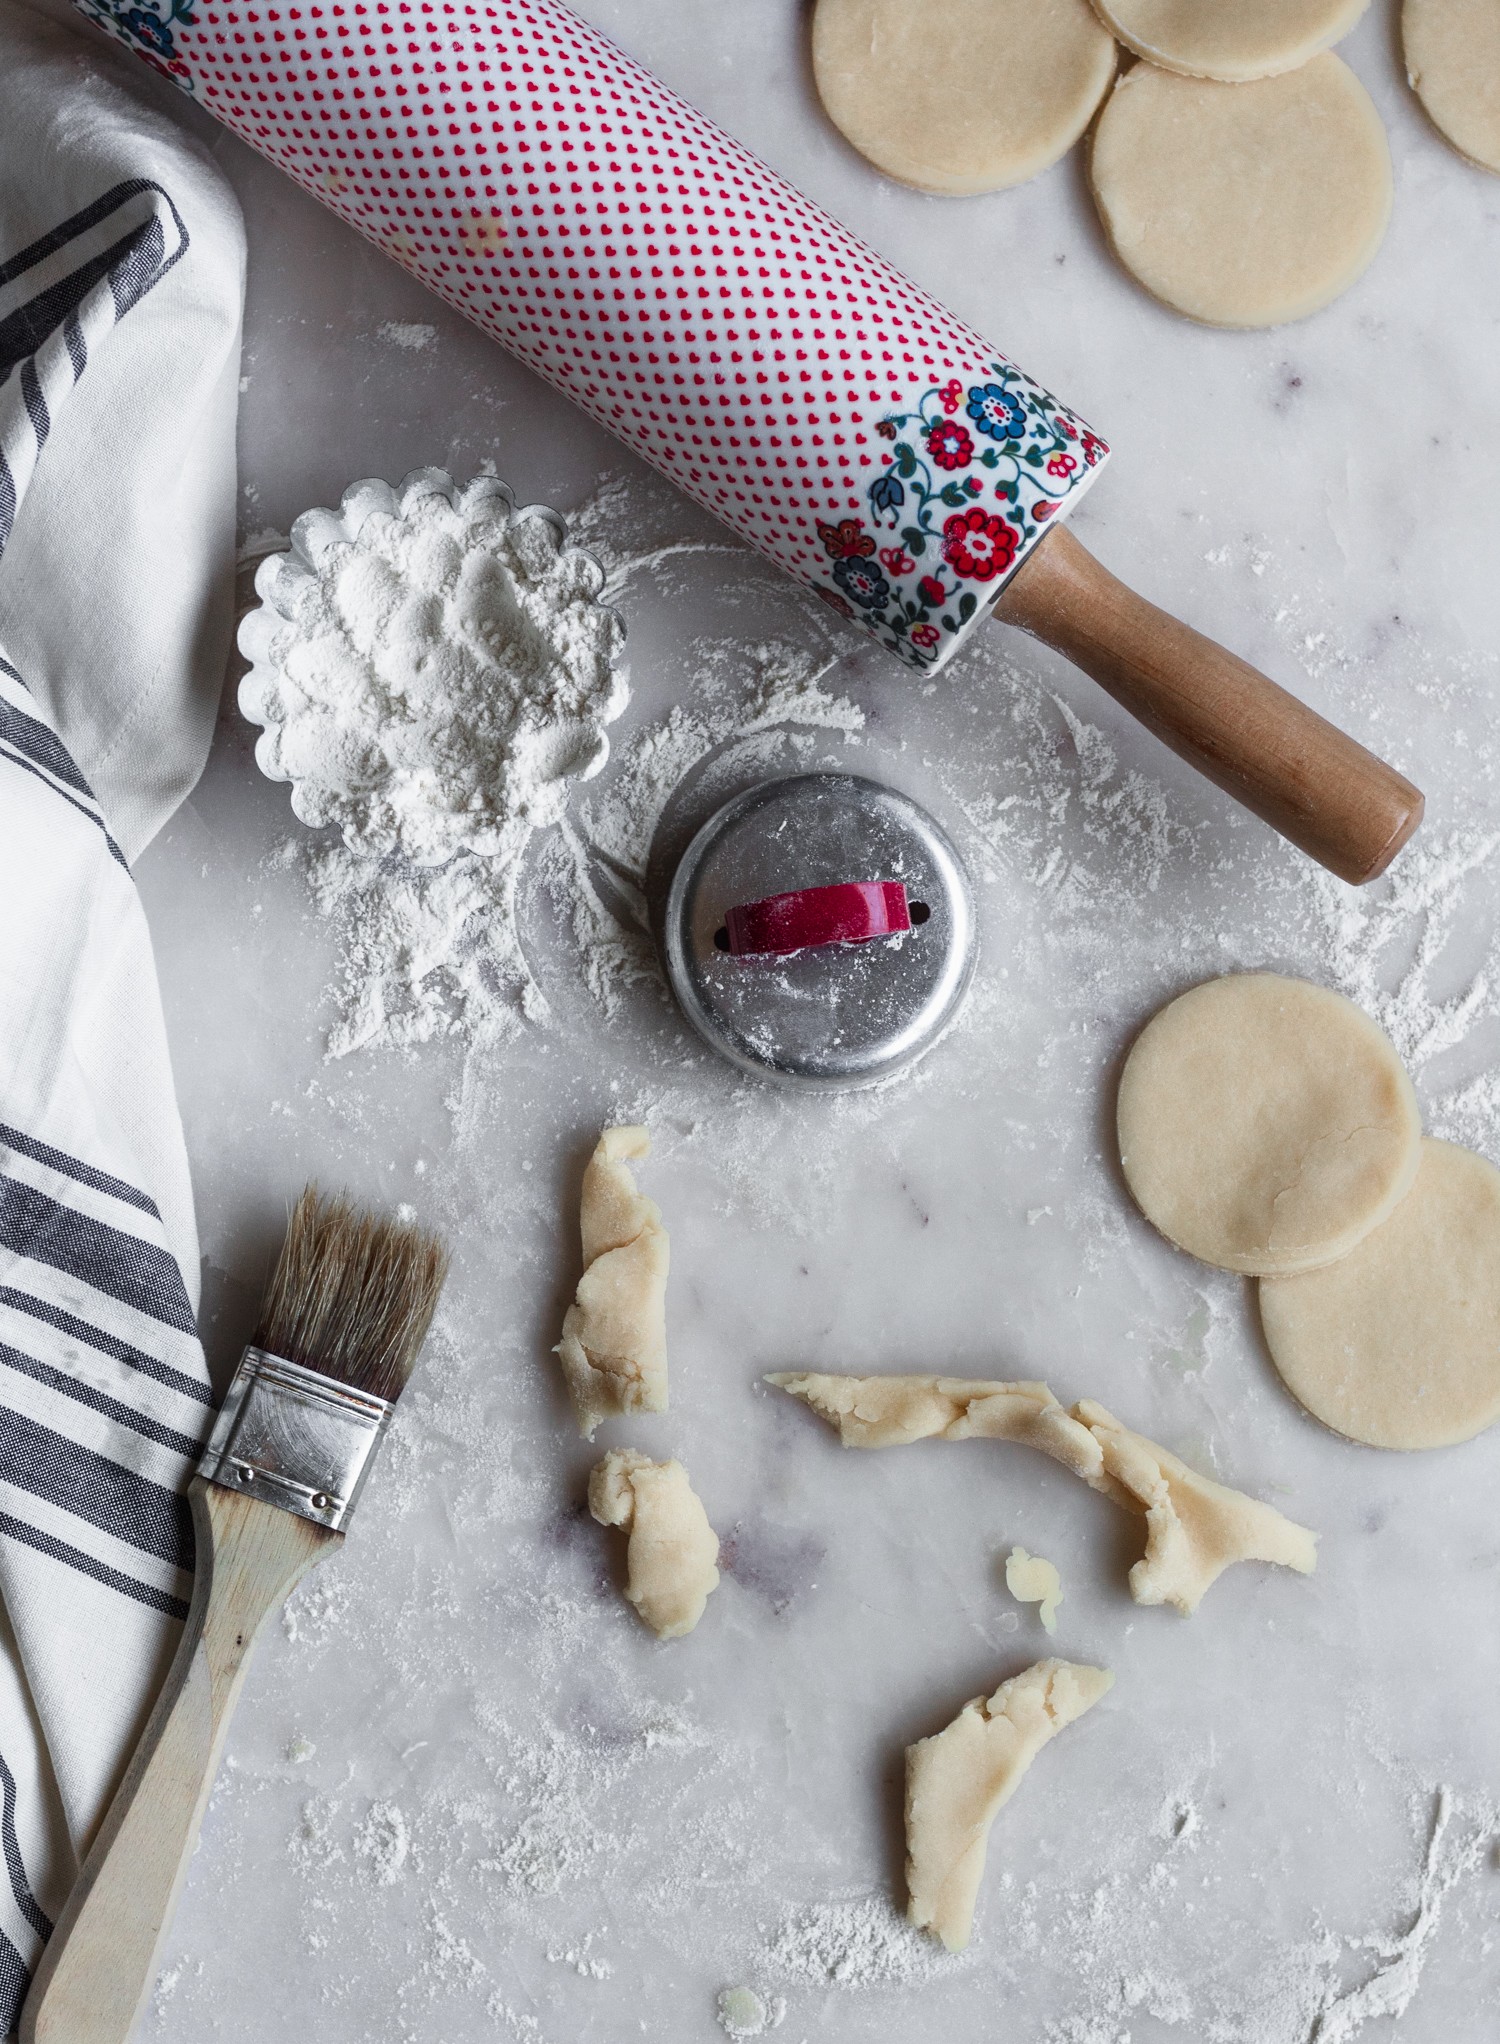 Pie dough rounds on a floured marble counter next to a white linen and flowery rolling pin.